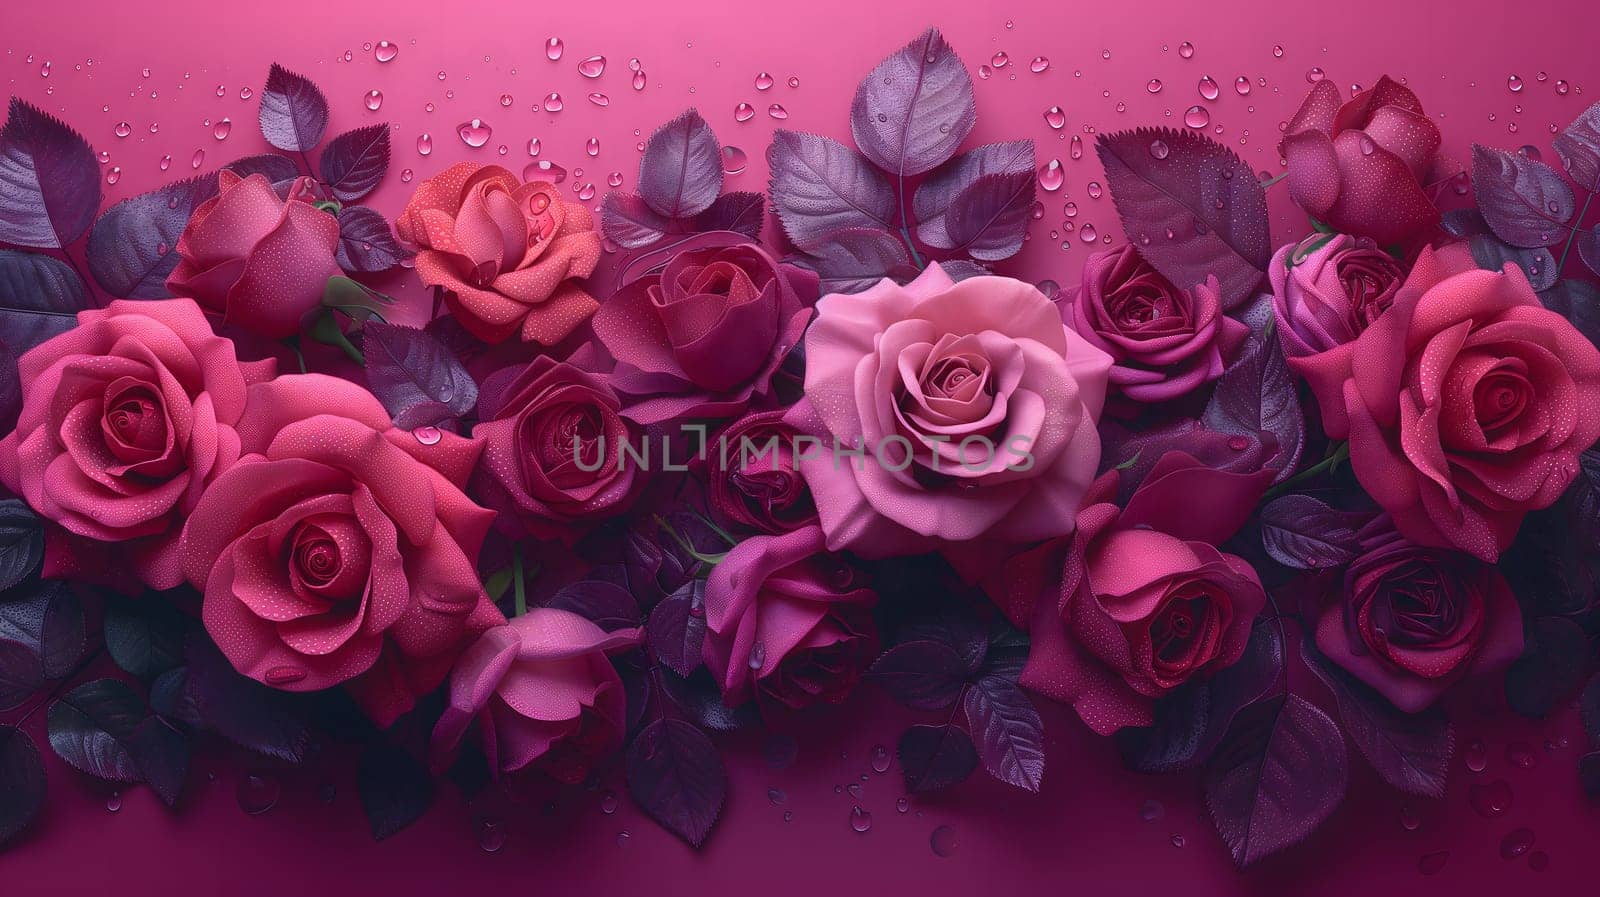 A lush bouquet of roses with dew drops by z1b